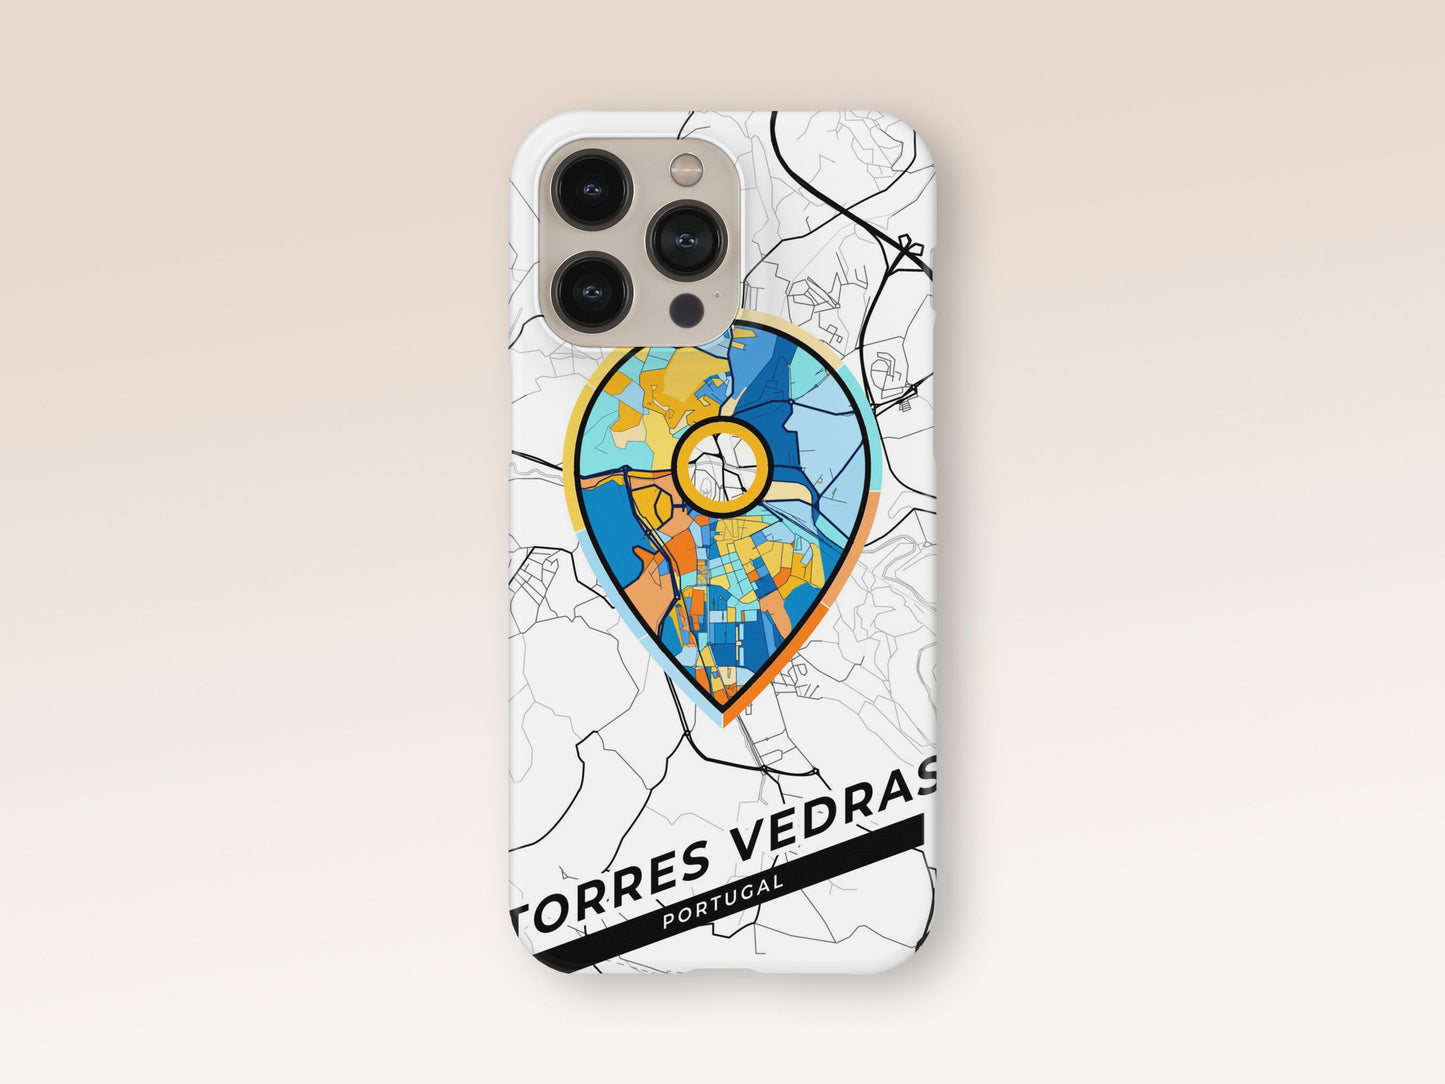 Torres Vedras Portugal slim phone case with colorful icon 1